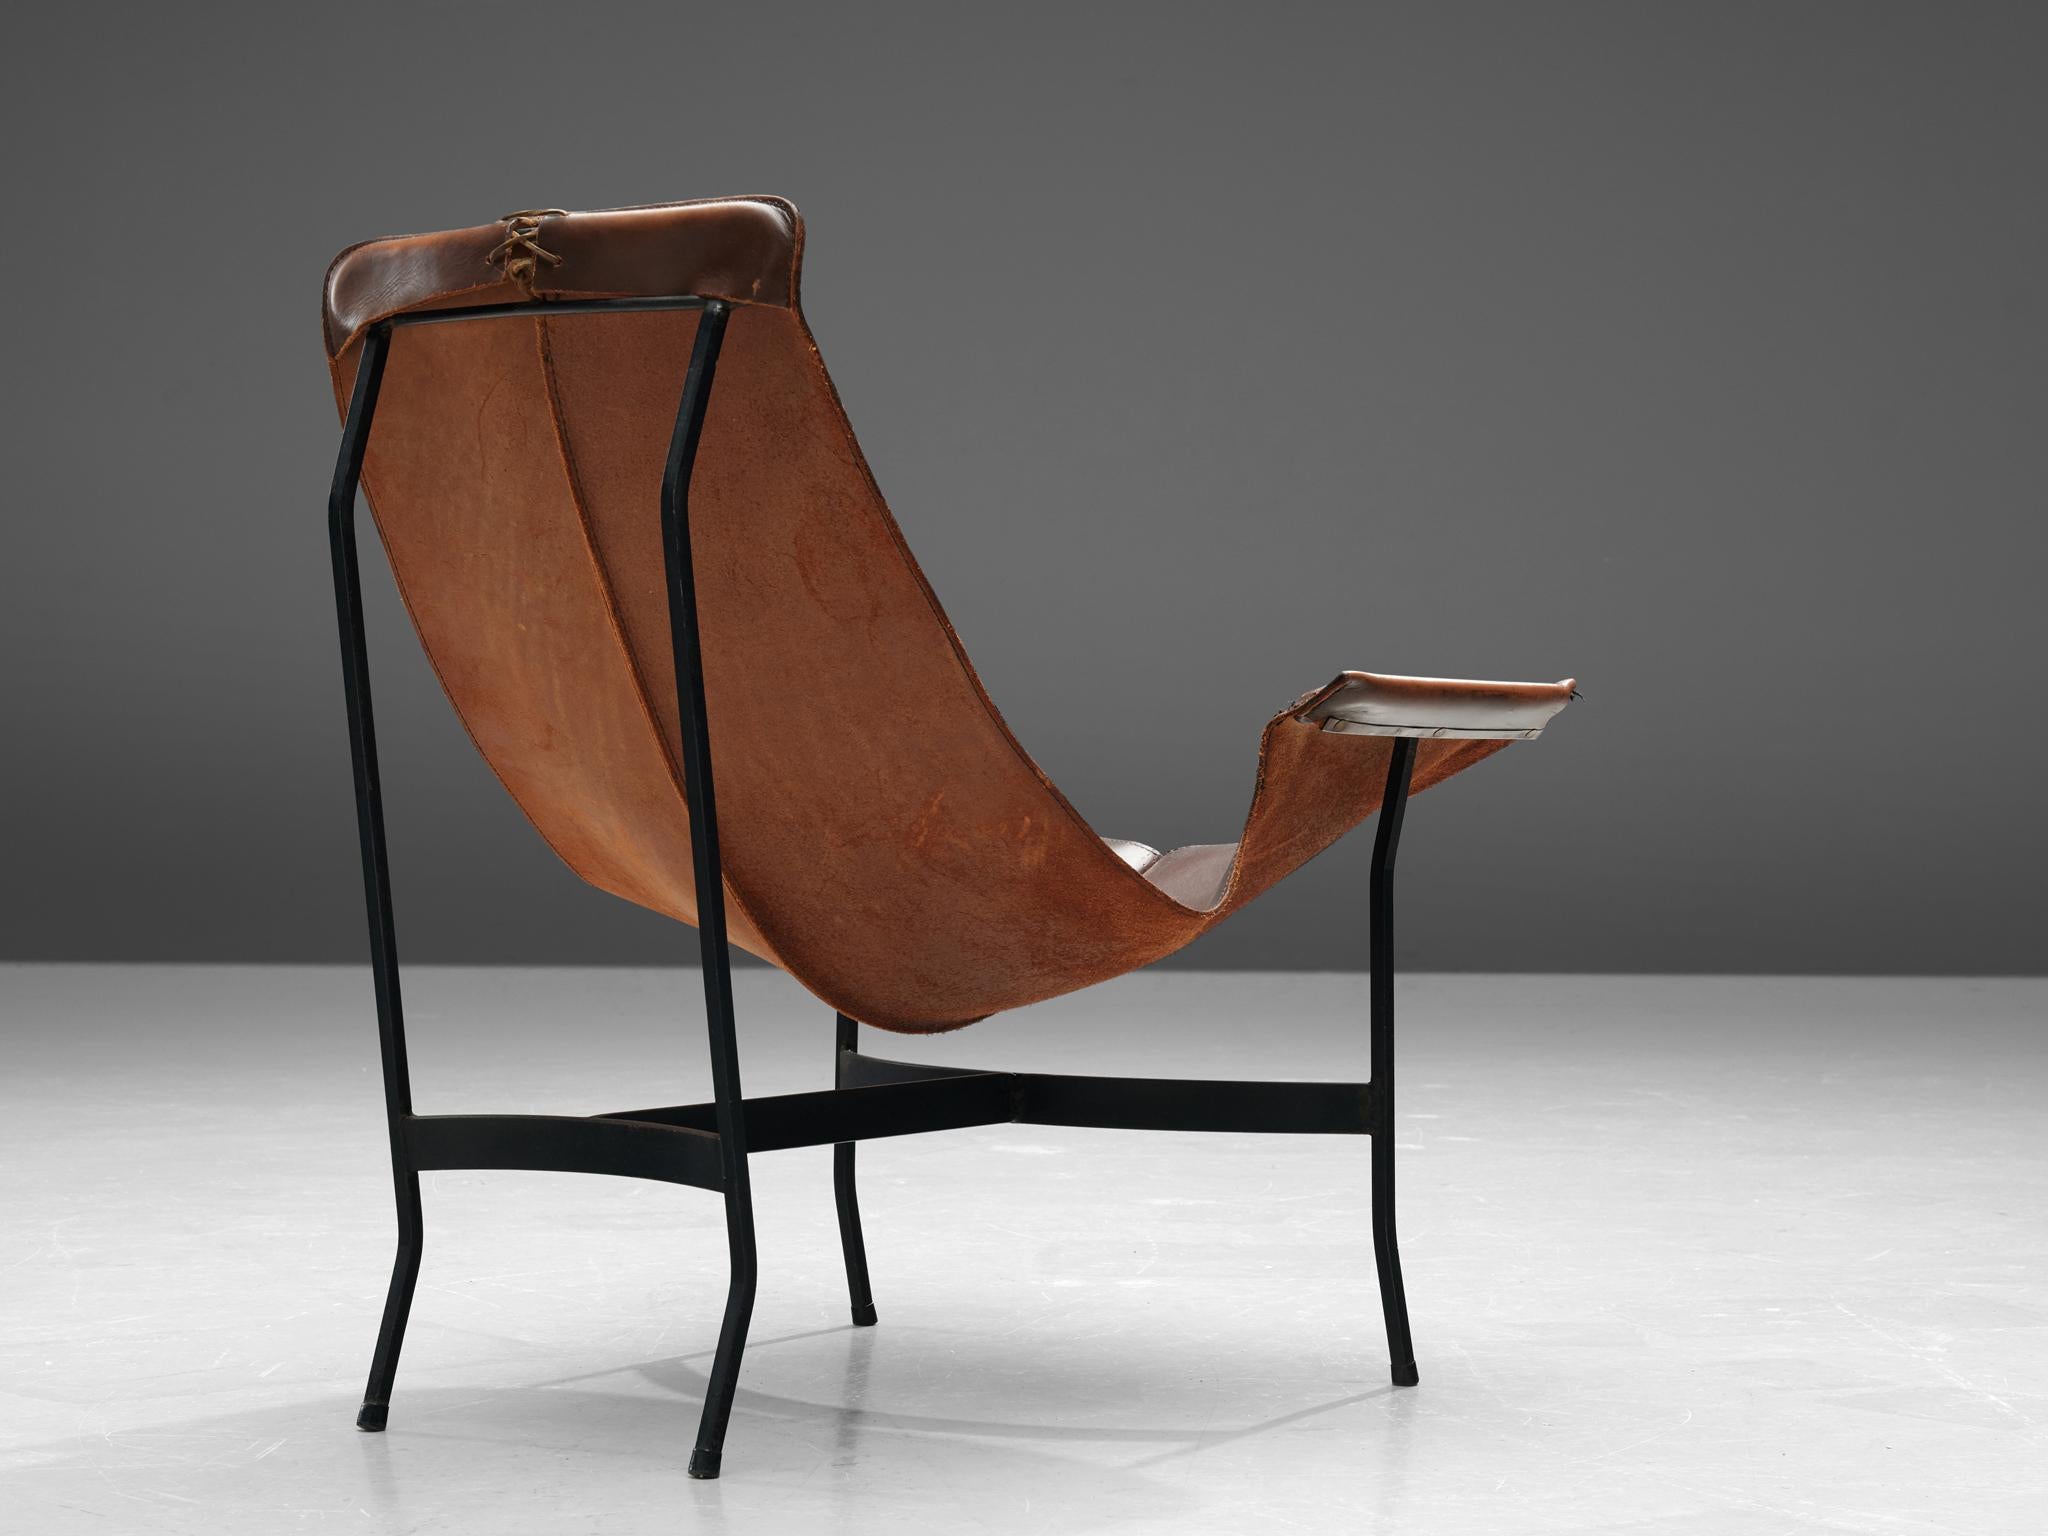 William Katavolos for Leathercrafter, sling lounge chair, metal and leather, United States, 1960s

A stunning Smokers chair designed by William Katavolos for Leathercrafter. The lounge chair shows strong resemblances to the earlier T-chair that